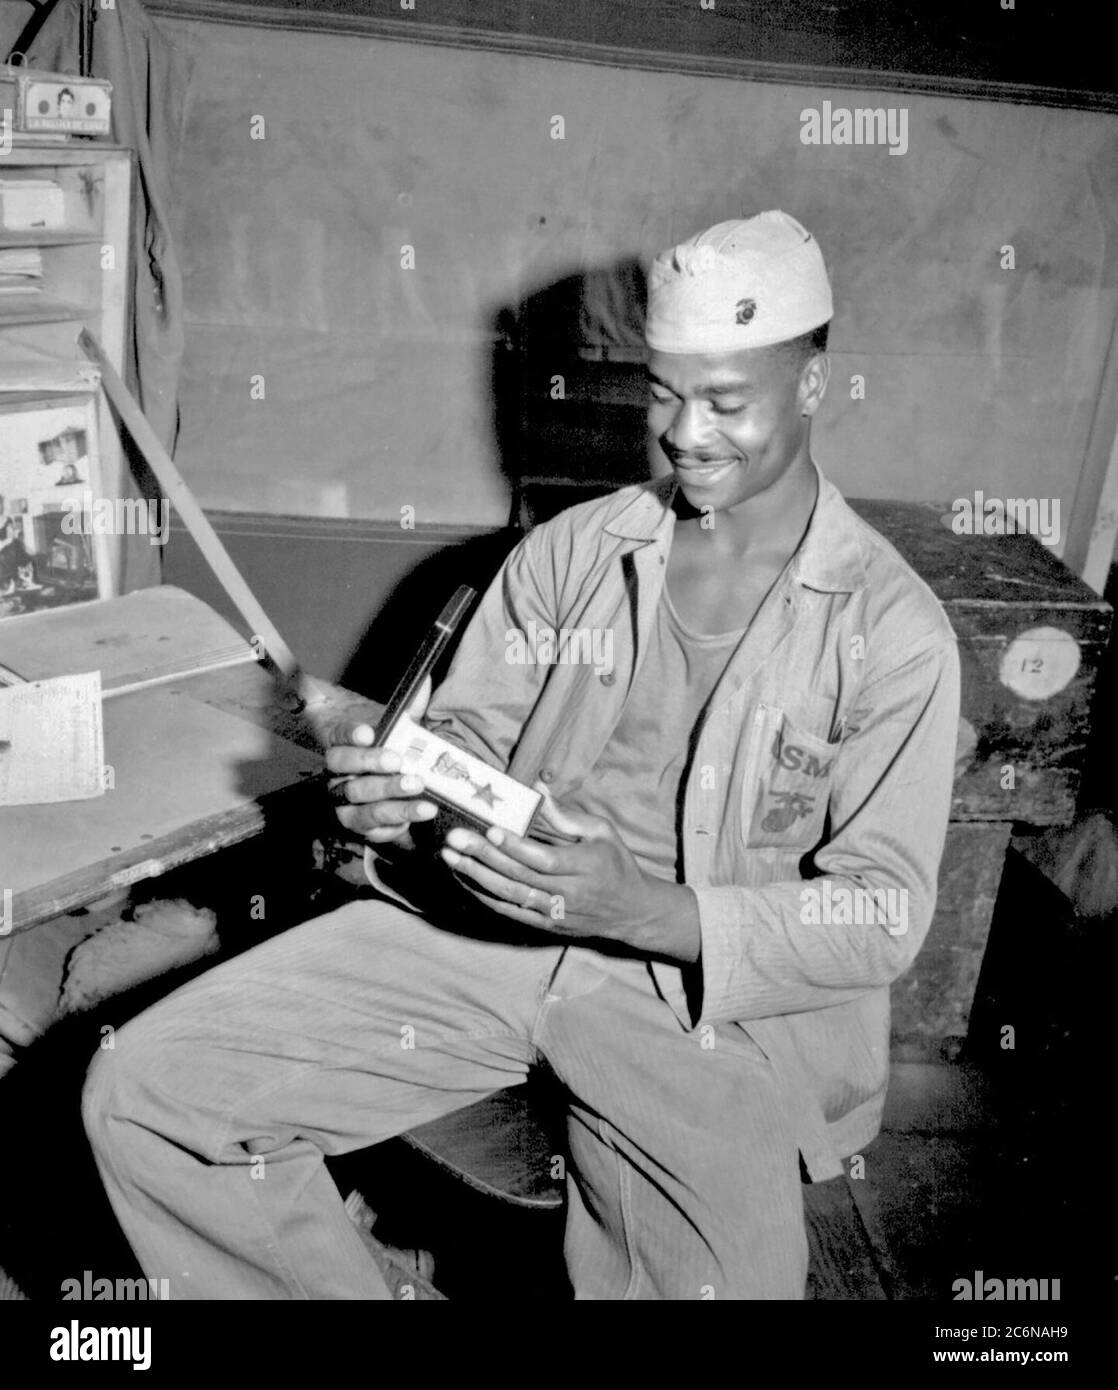 Pfc. Luther Woodward, a member of the 4th Ammunition Company, admires the Bronze Star awarded to him for 'his bravery, initiative and battle-cunning.' The award was later upgraded to the Silver Star, April 17, 1945. (Photo by Cpl. Irving Deutch) Stock Photo